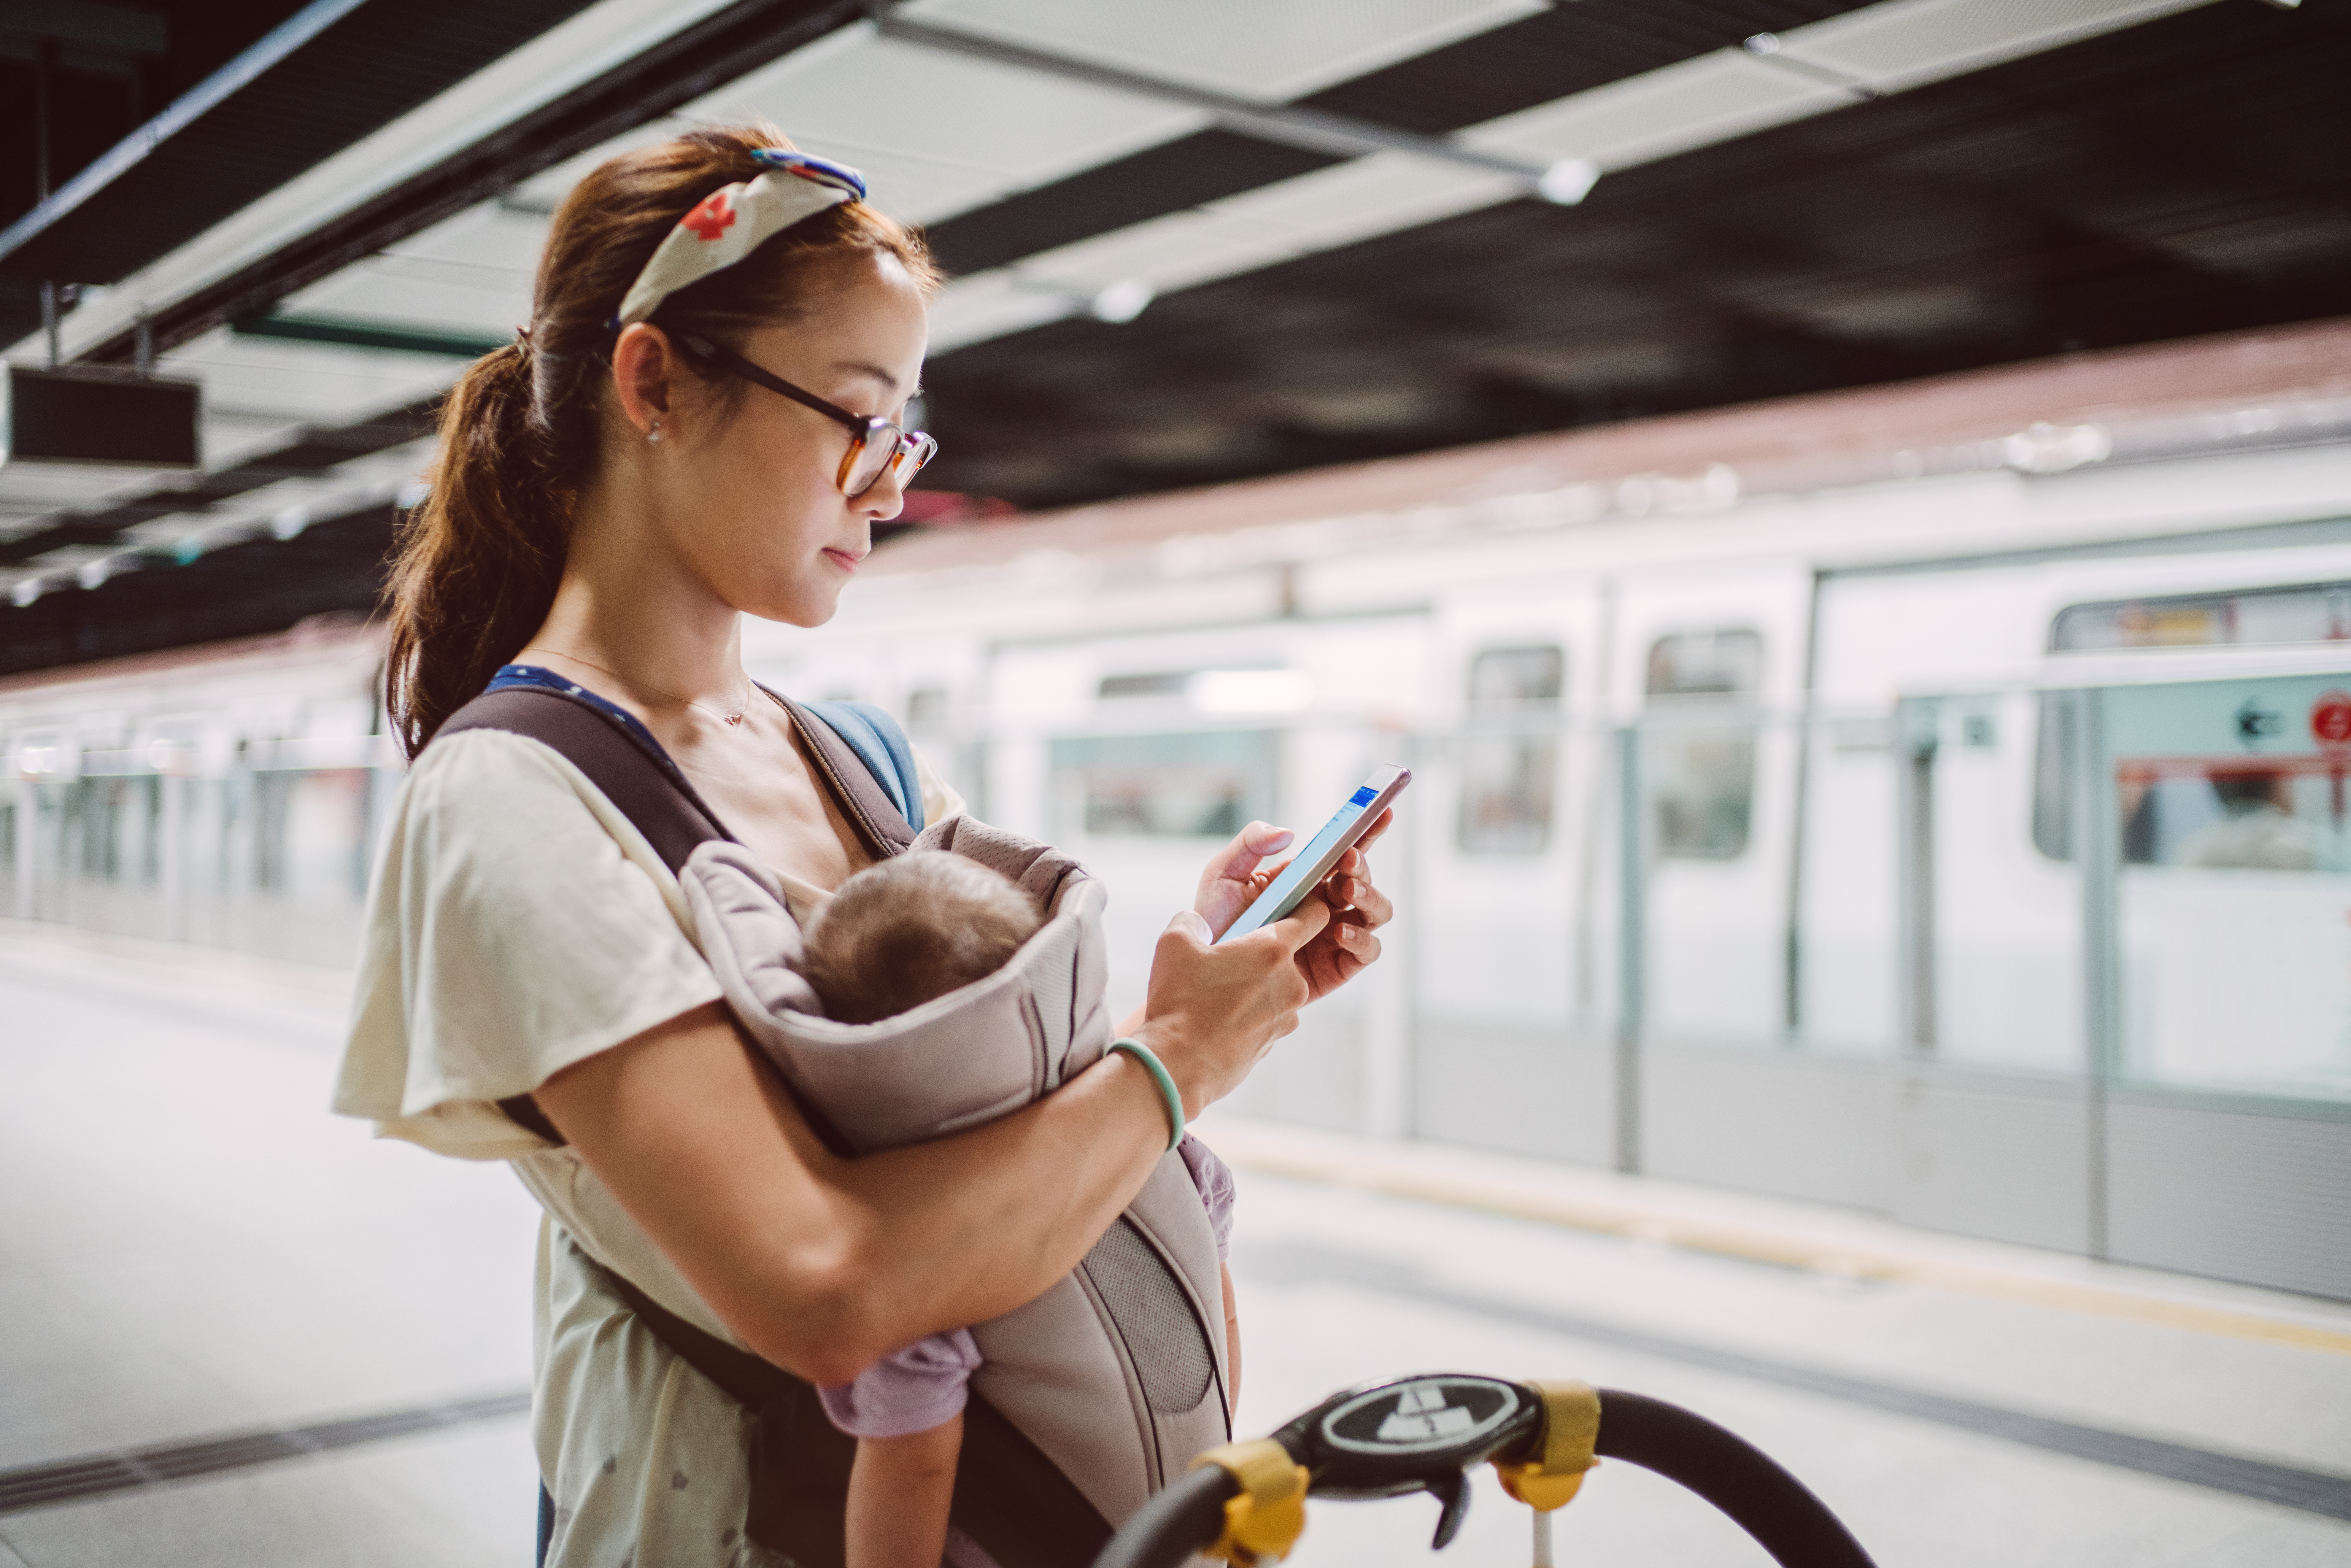 Pretty young mom carrying baby in a baby carrier using smartphone next to a baby stroller on the train platform.